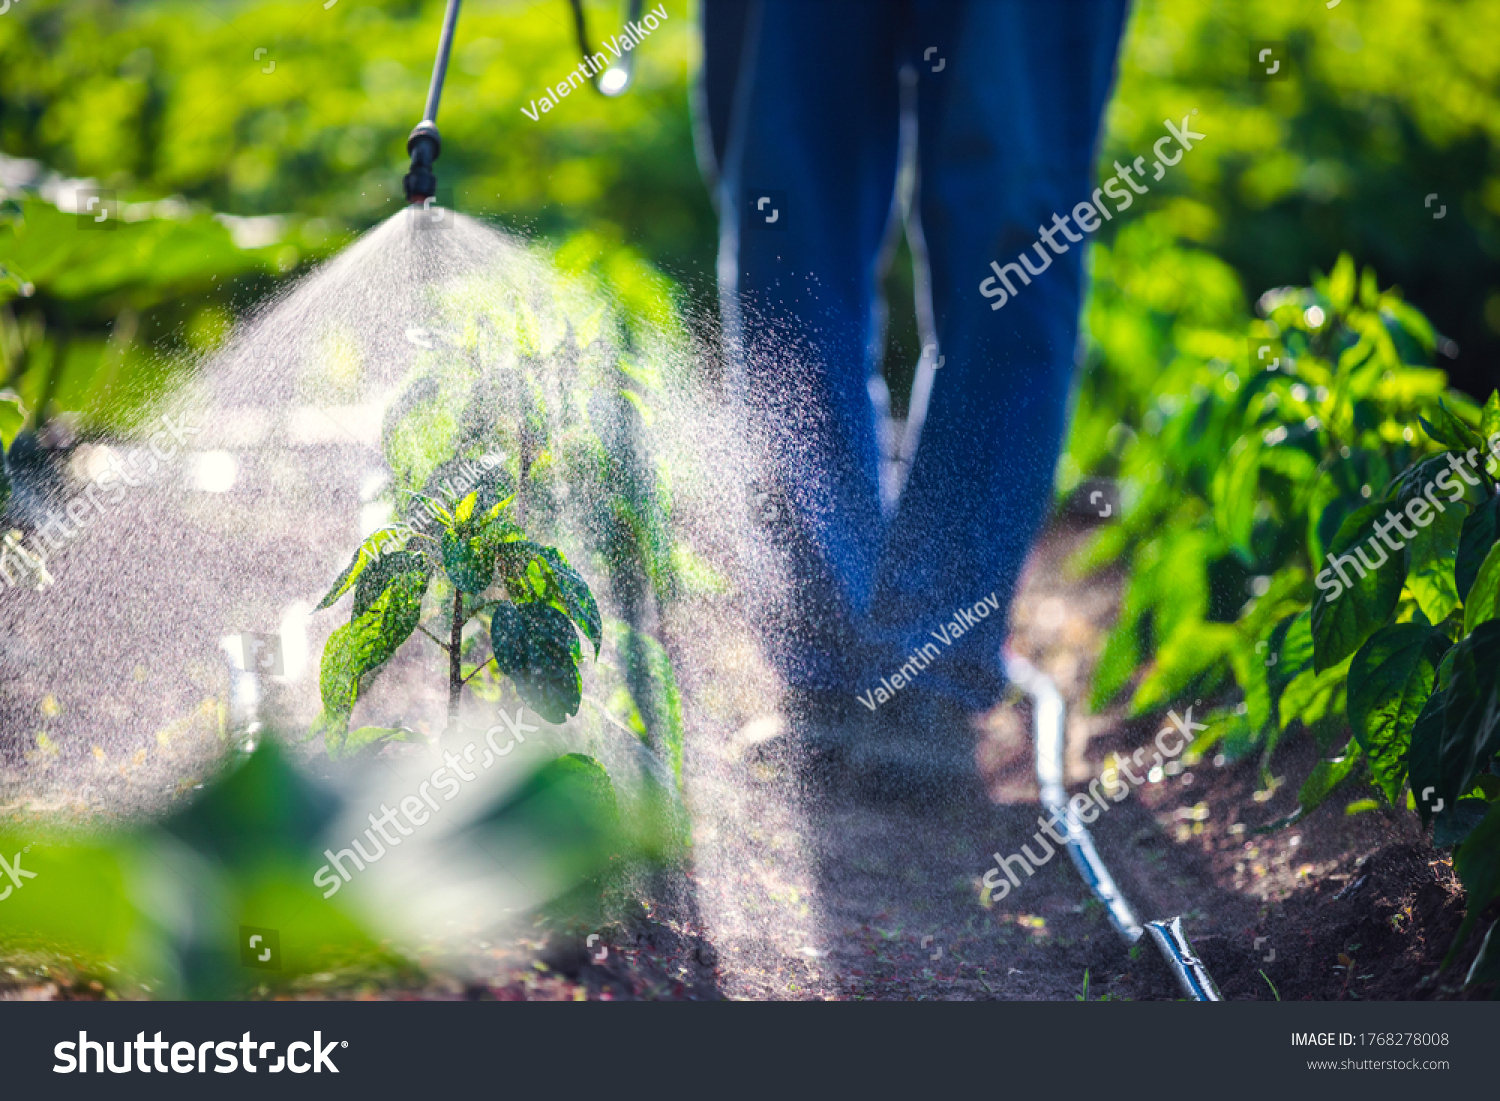 Farmer spraying vegetable green plants in the garden with herbicides, pesticides or insecticides. #1768278008